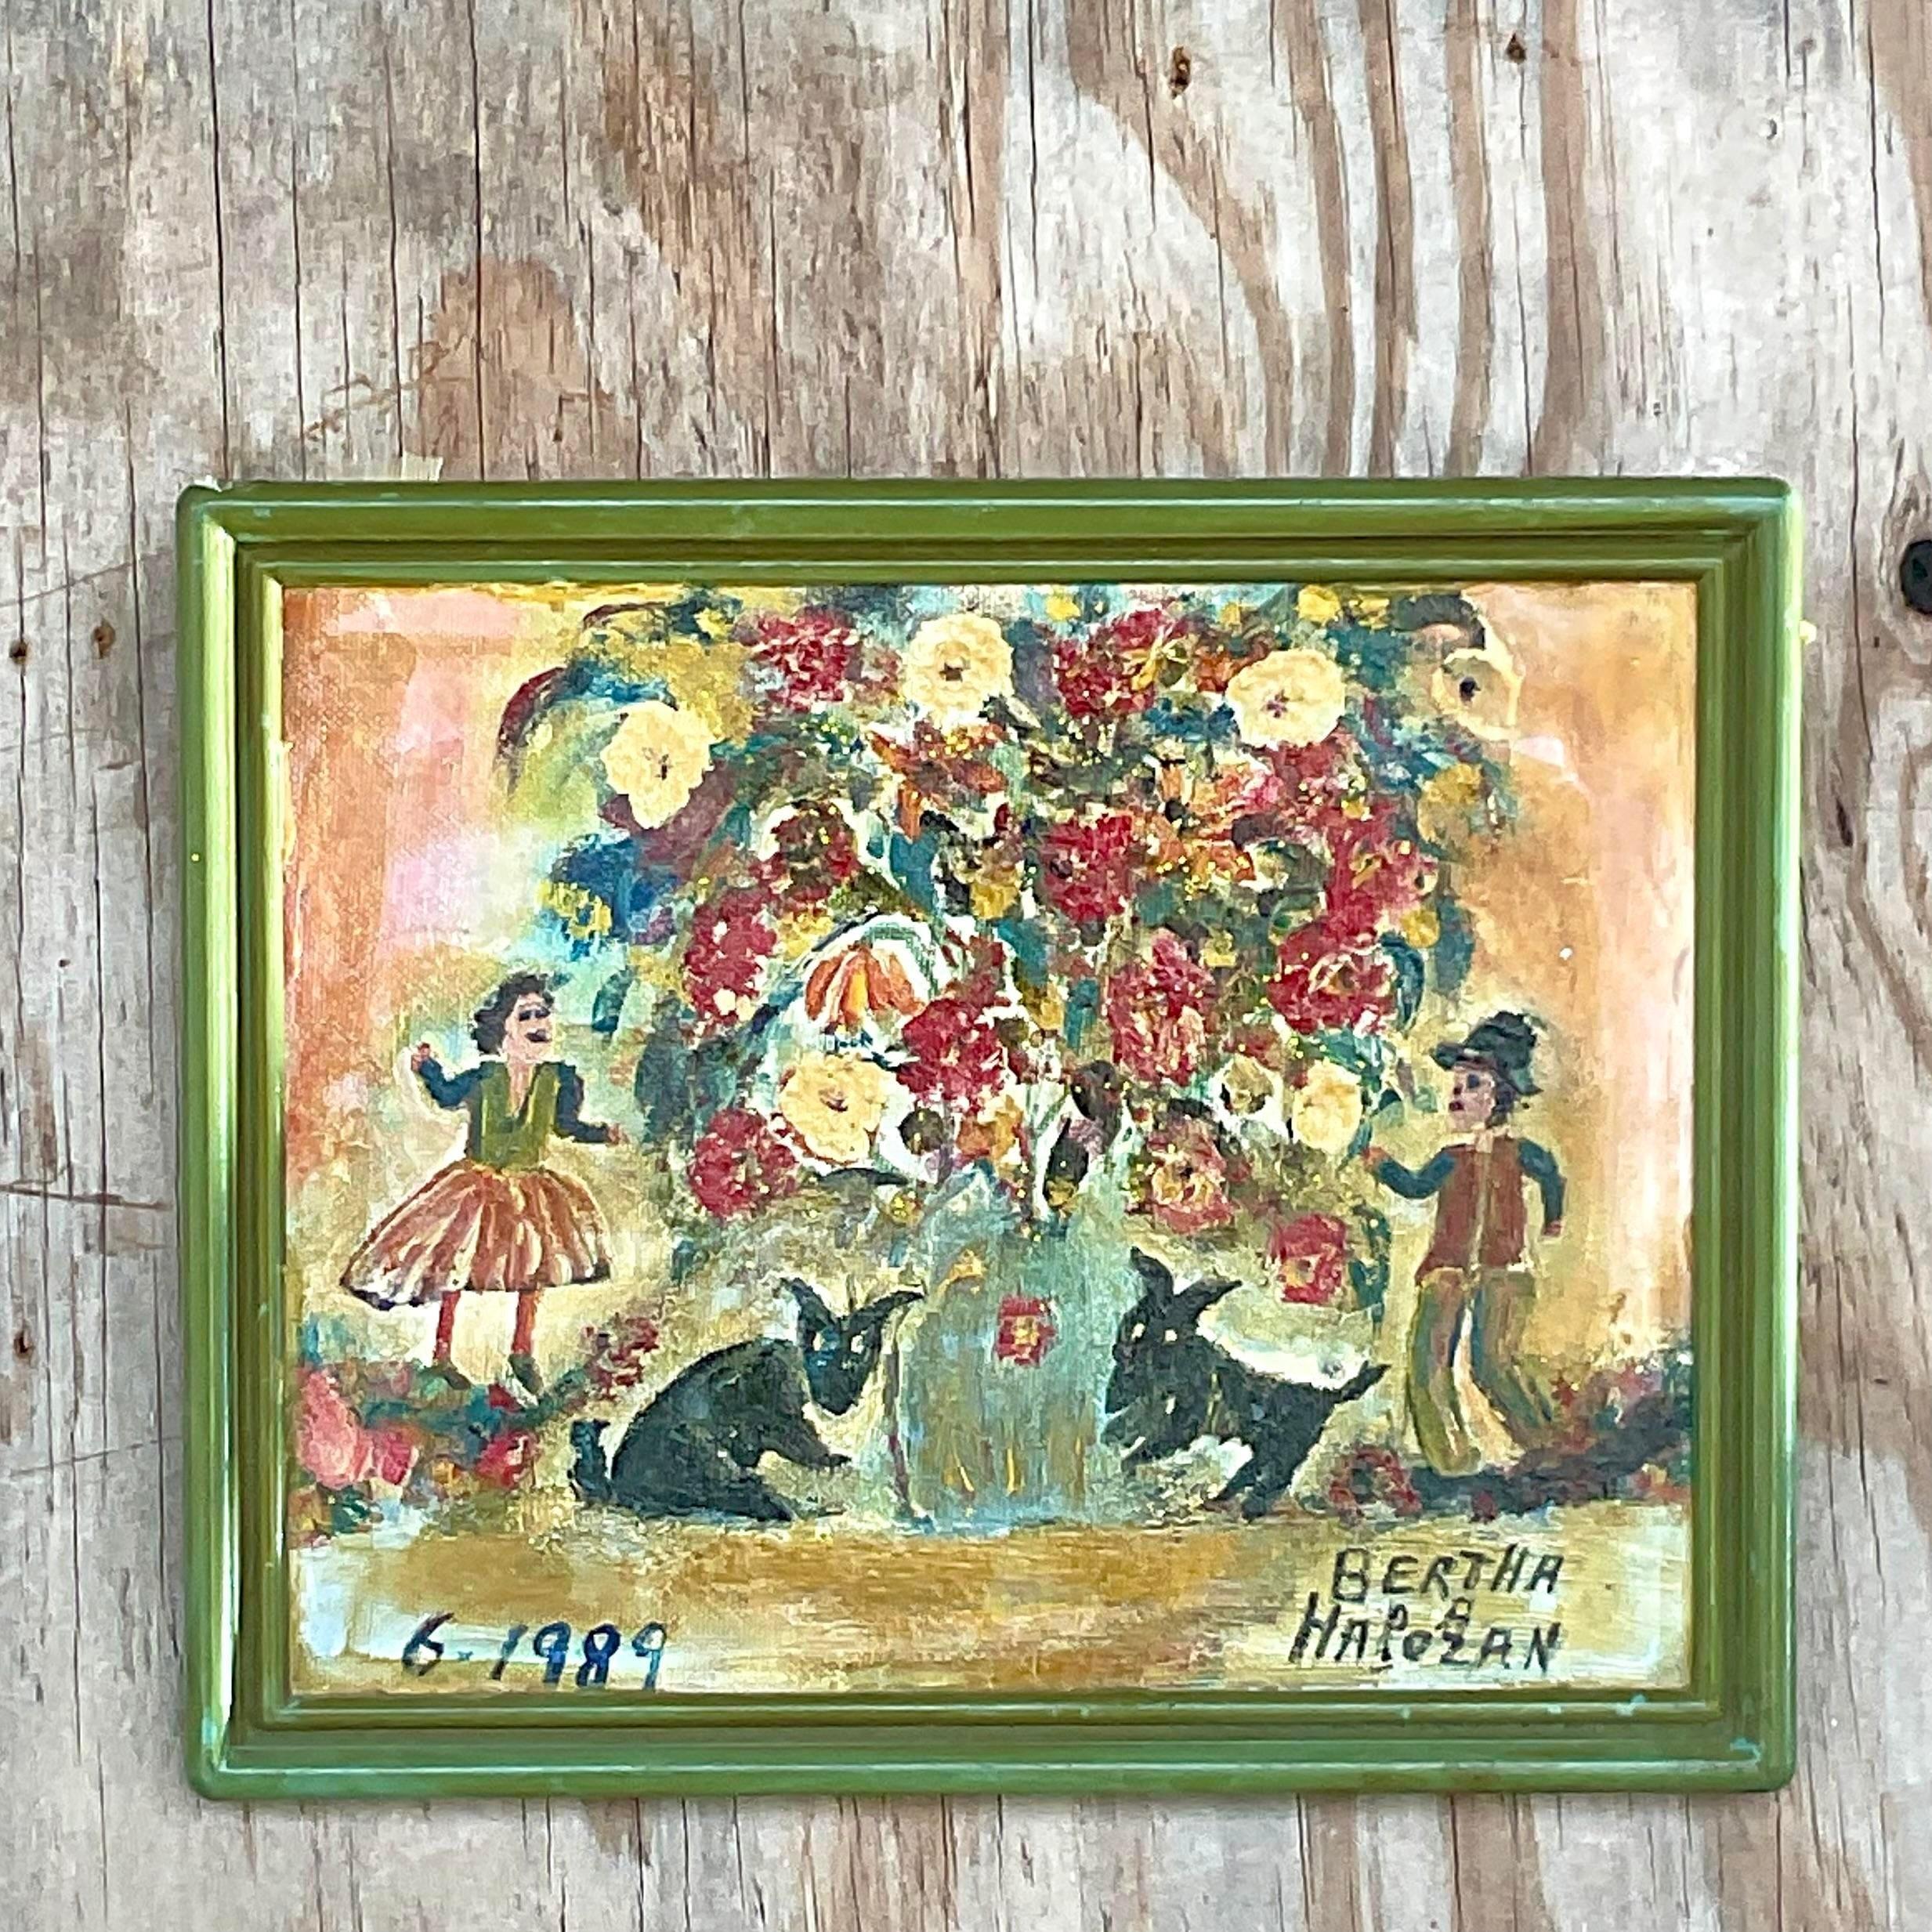 A fabulous vintage Boho original oil painting. A beautiful Abstract Expressionist composition in small strokes. A work done by the highly collectible Bertha Halozan. Signed and dated by the artist. Acquired from a Palm Beach estate.